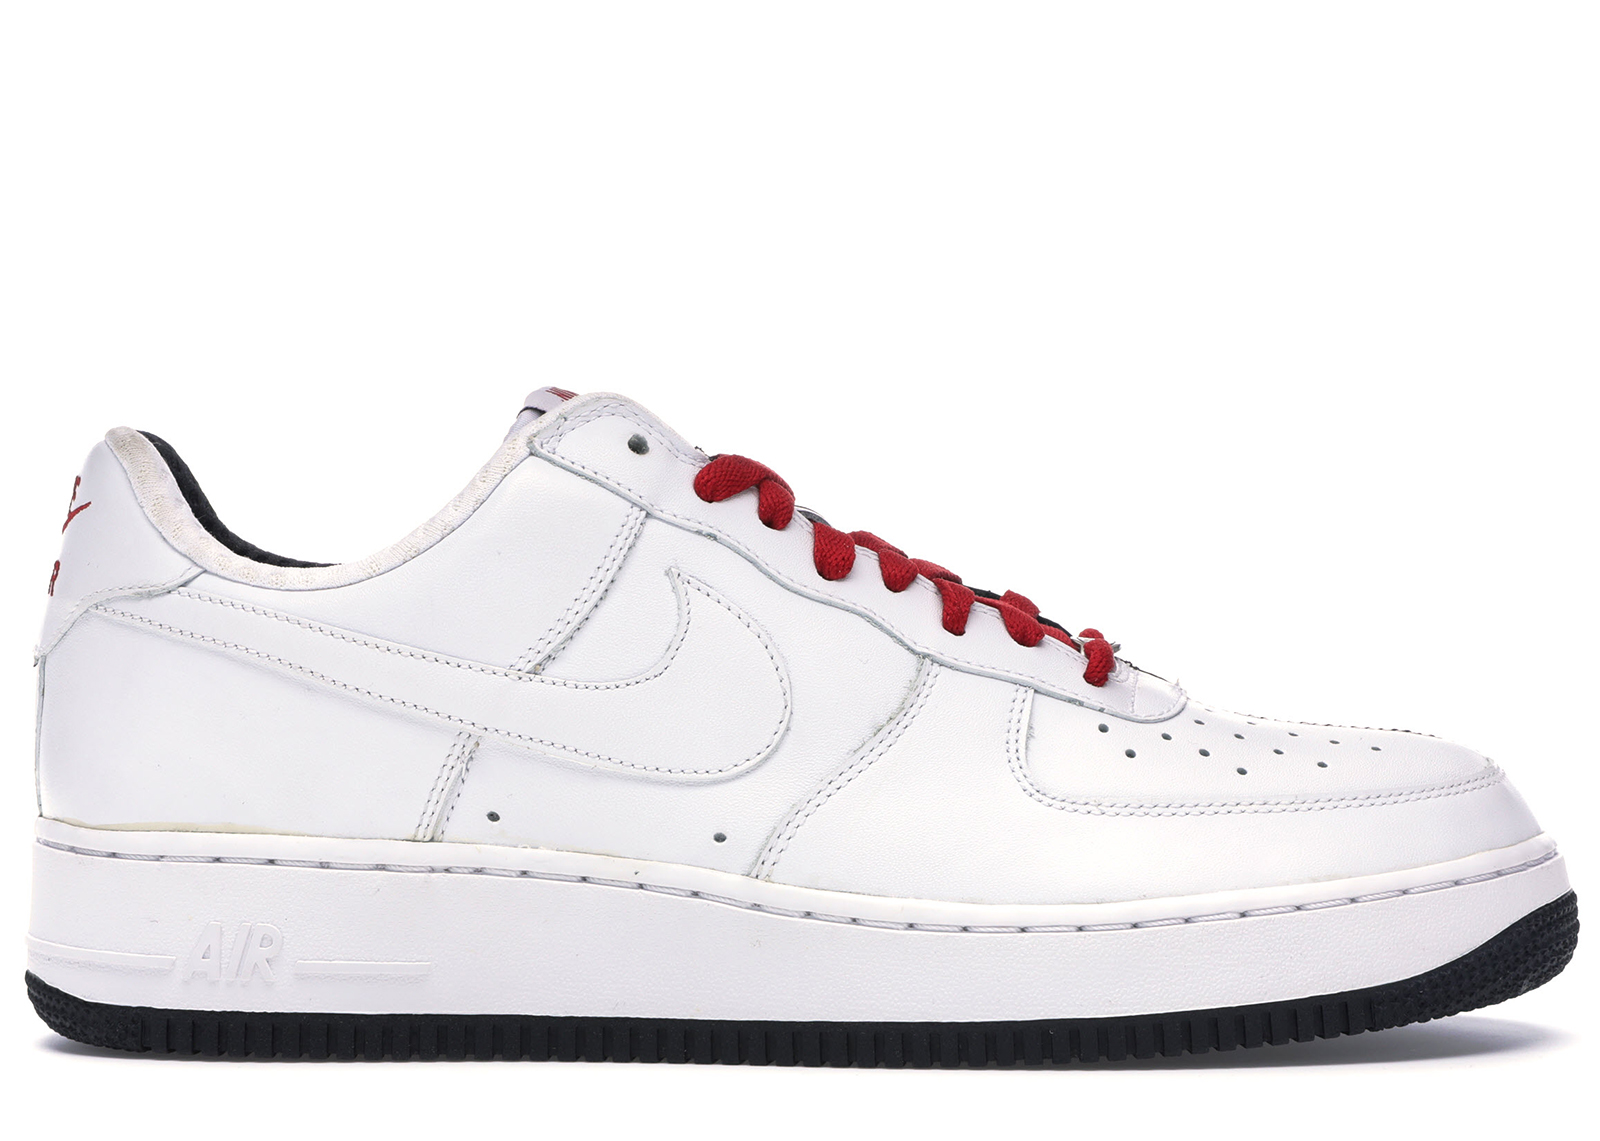 Nike Air Force 1 Low Scarface メンズ - 313641-101 - JP